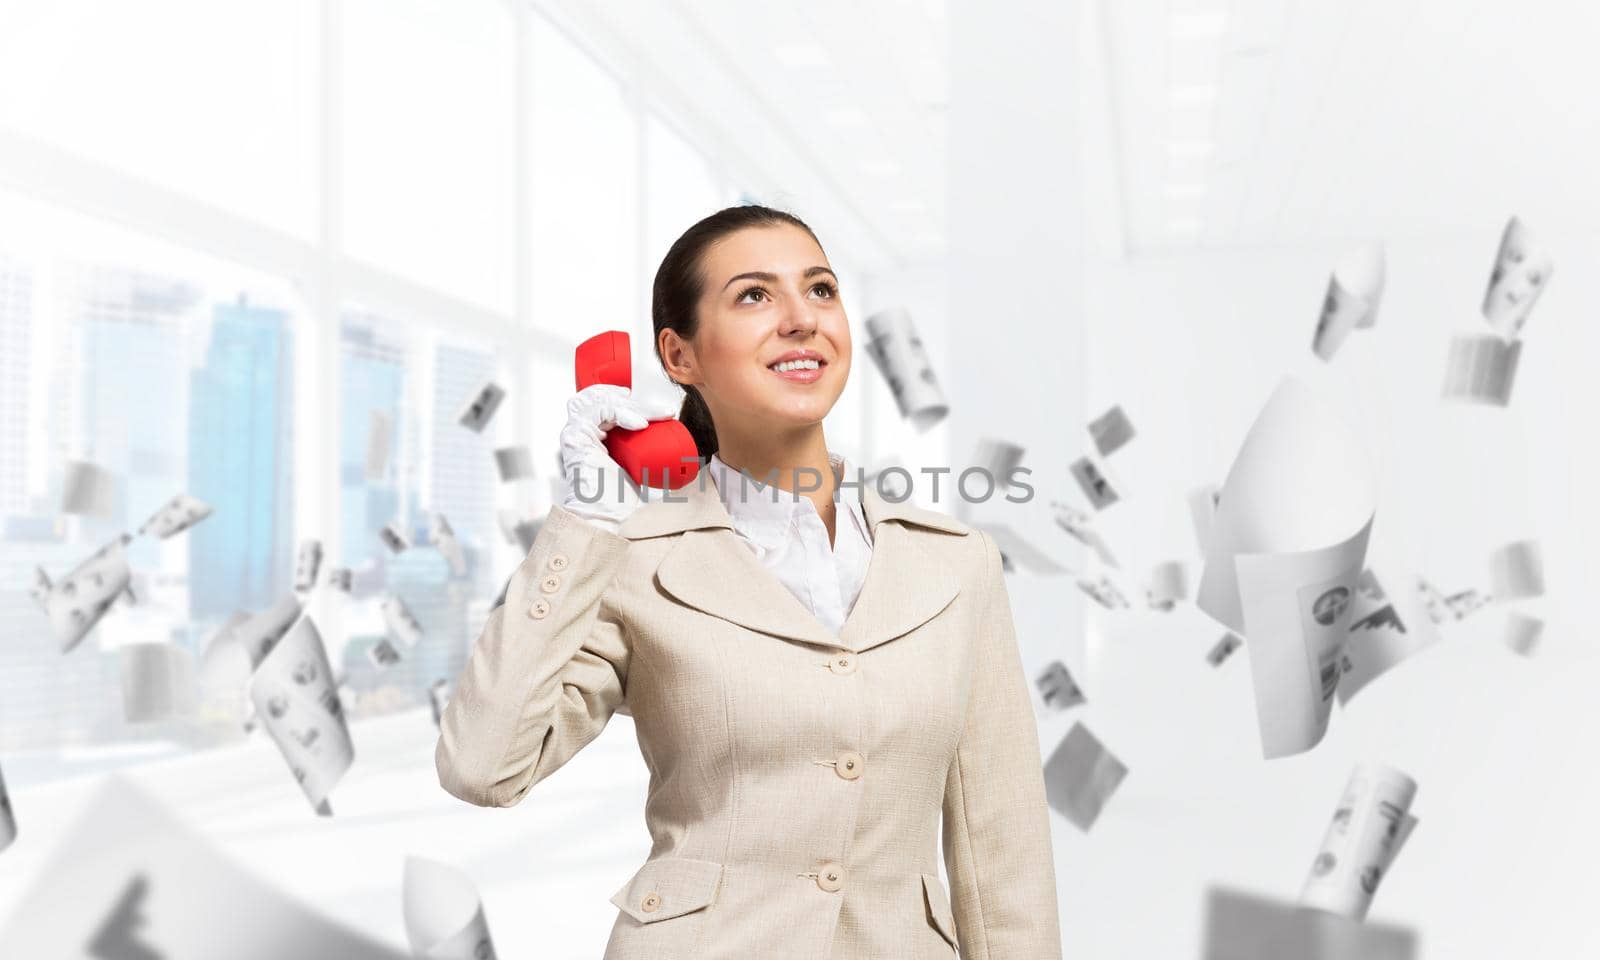 Smiling young woman holding retro red phone in office with flying paper documents. Call center operator in business suit with telephone. Hotline telemarketing. Business assistance and consultation.